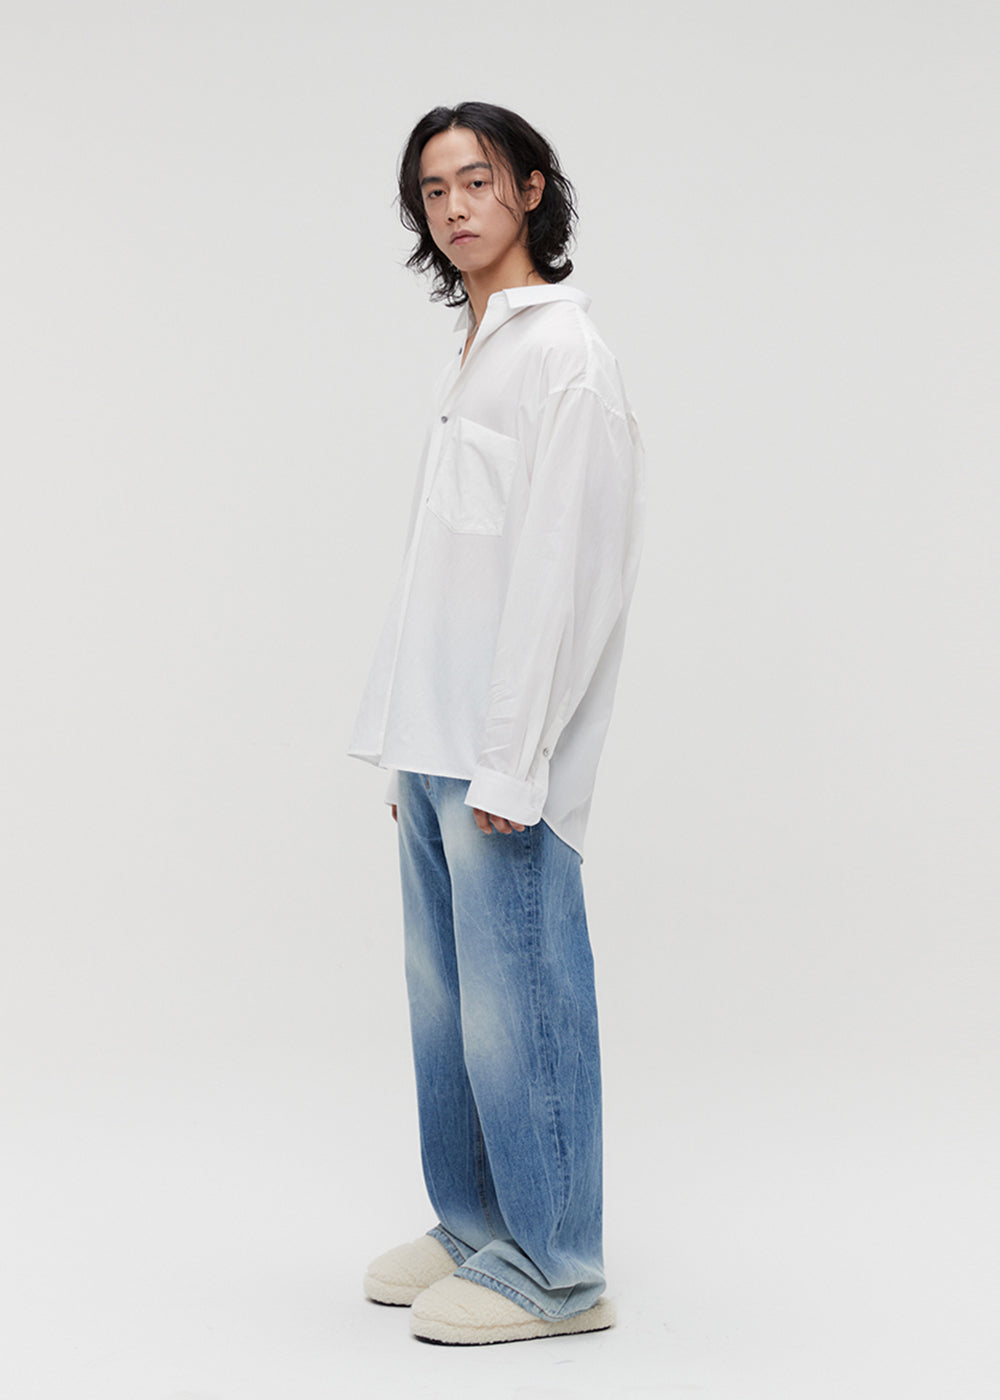 SIGNATURE SILKY OVER SIZE SHIRT_IVORY